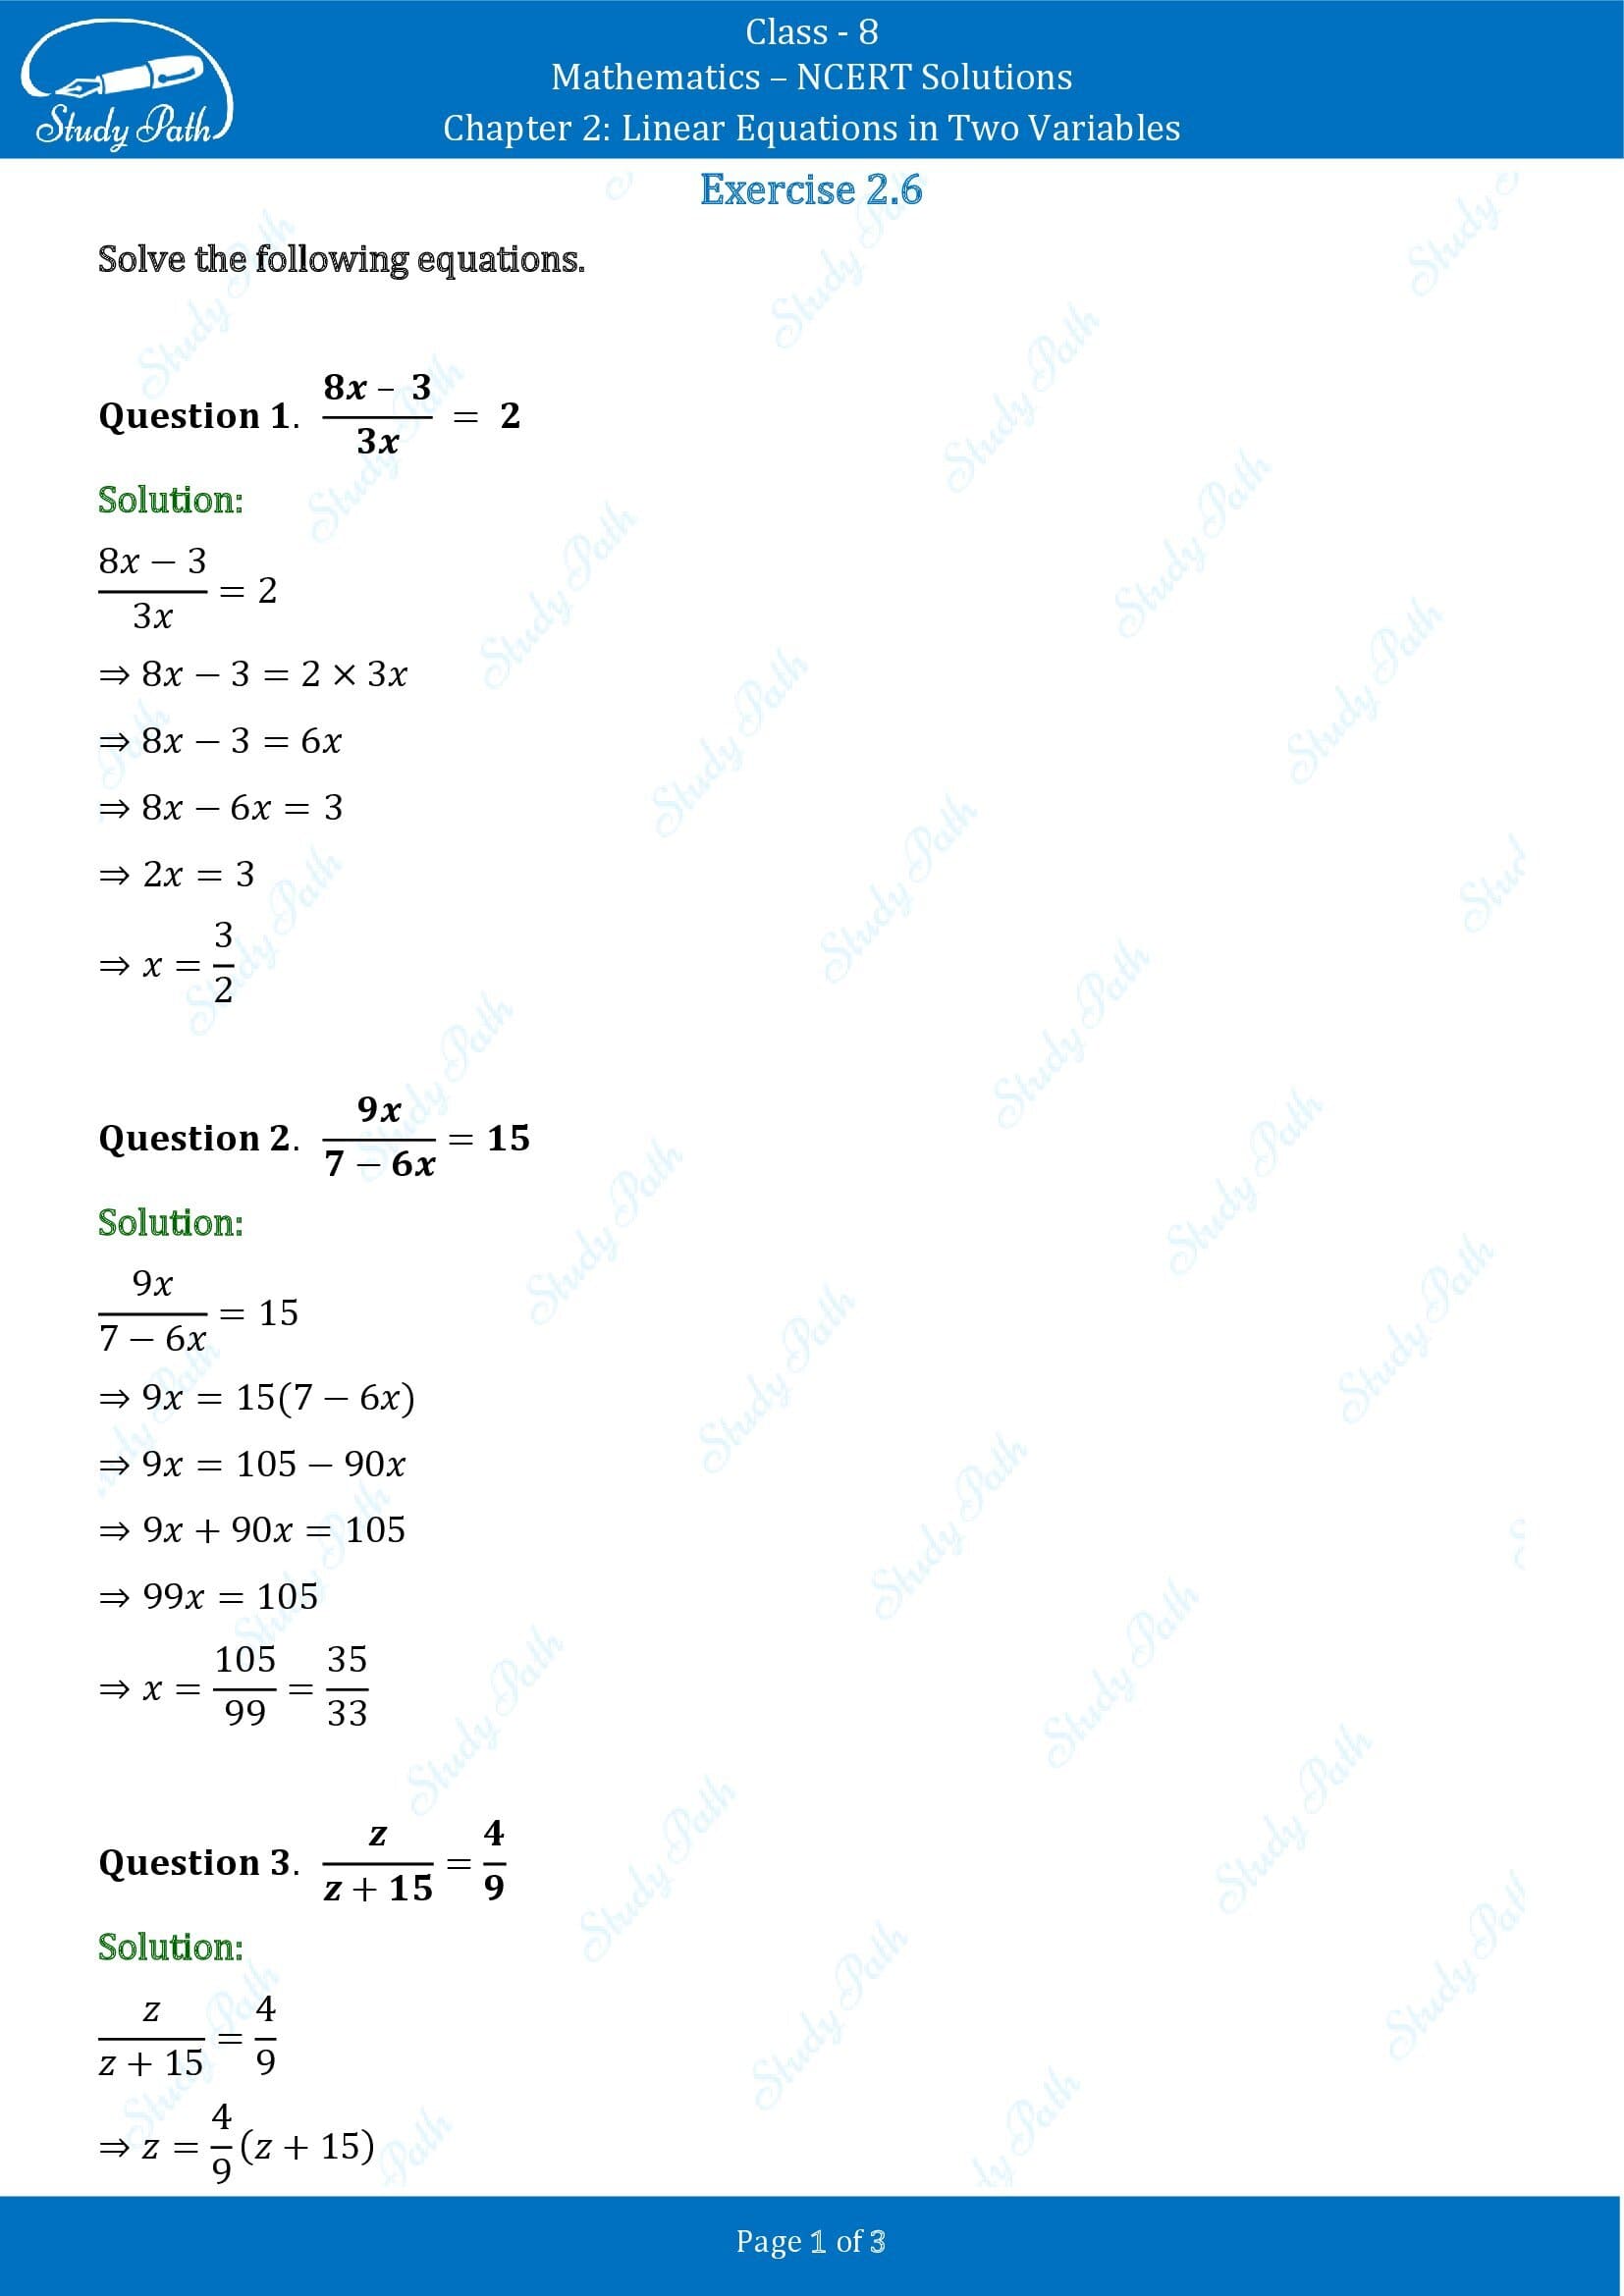 NCERT Solutions for Class 8 Maths Chapter 2 Linear Equations in Two Variables Exercise 2.6 00001